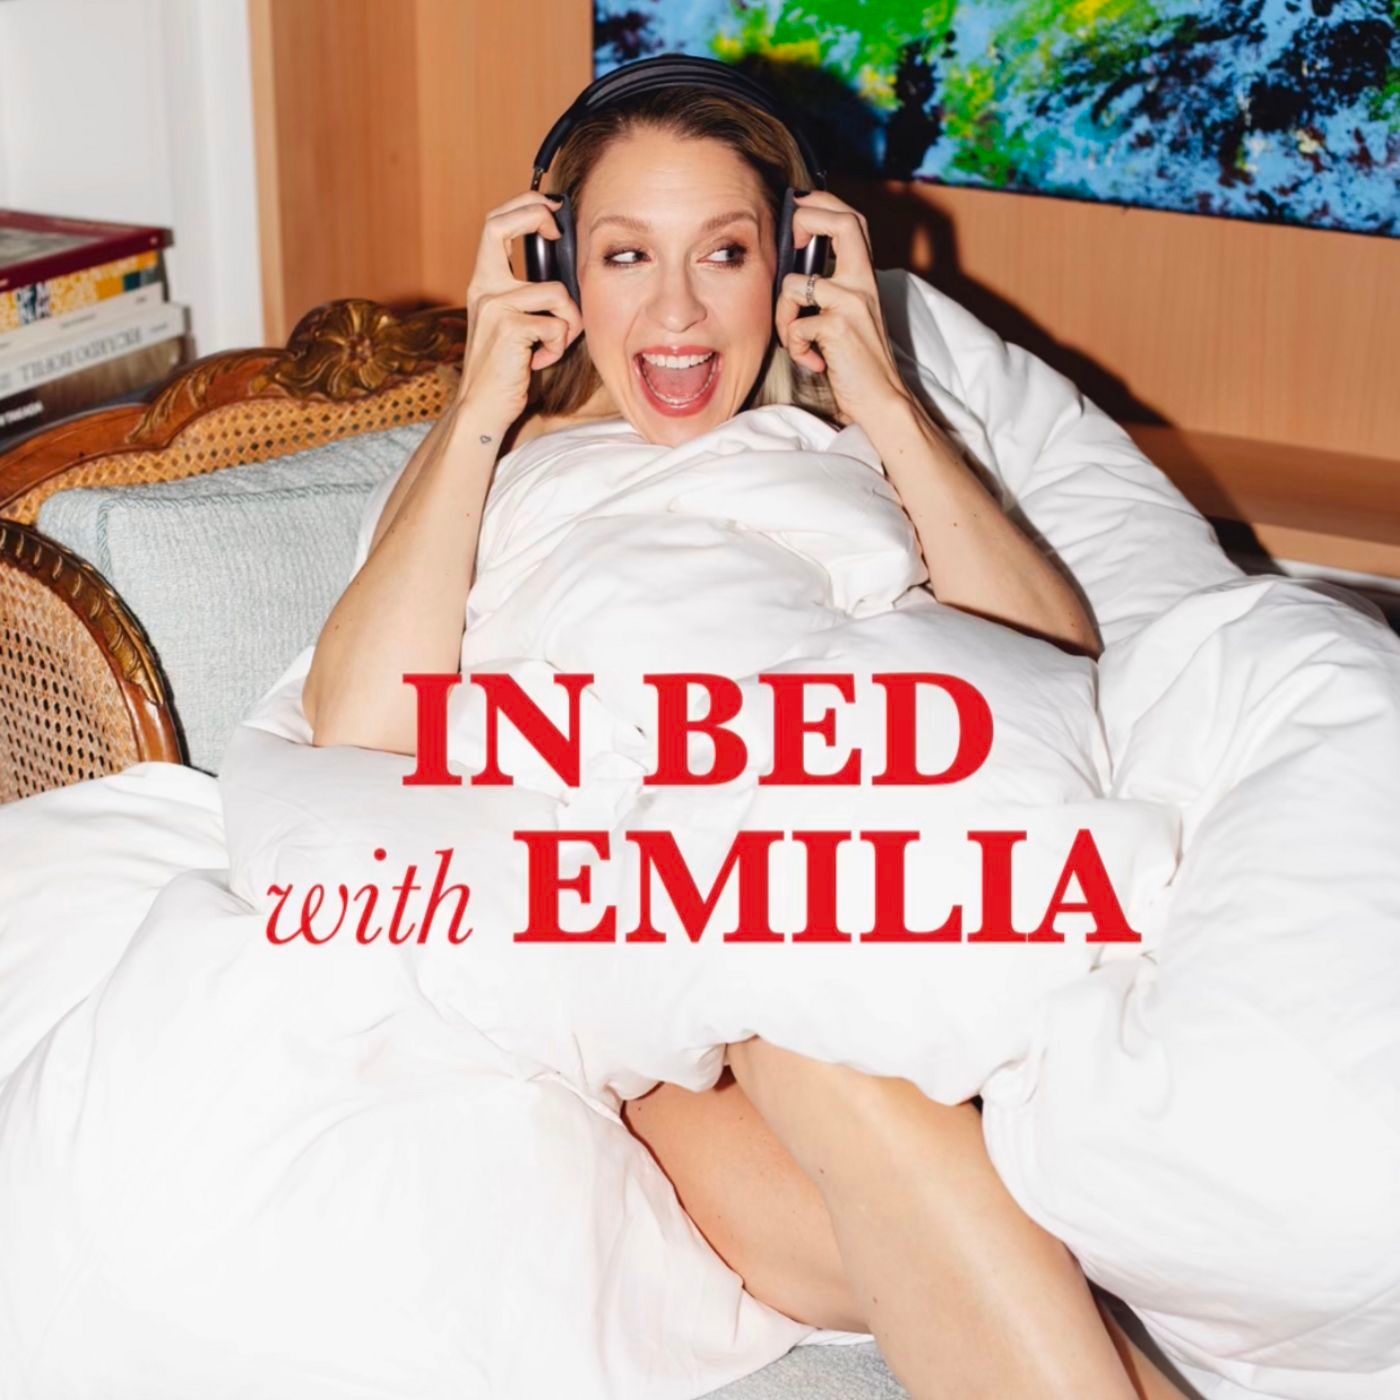 IN BED WITH EMILIA